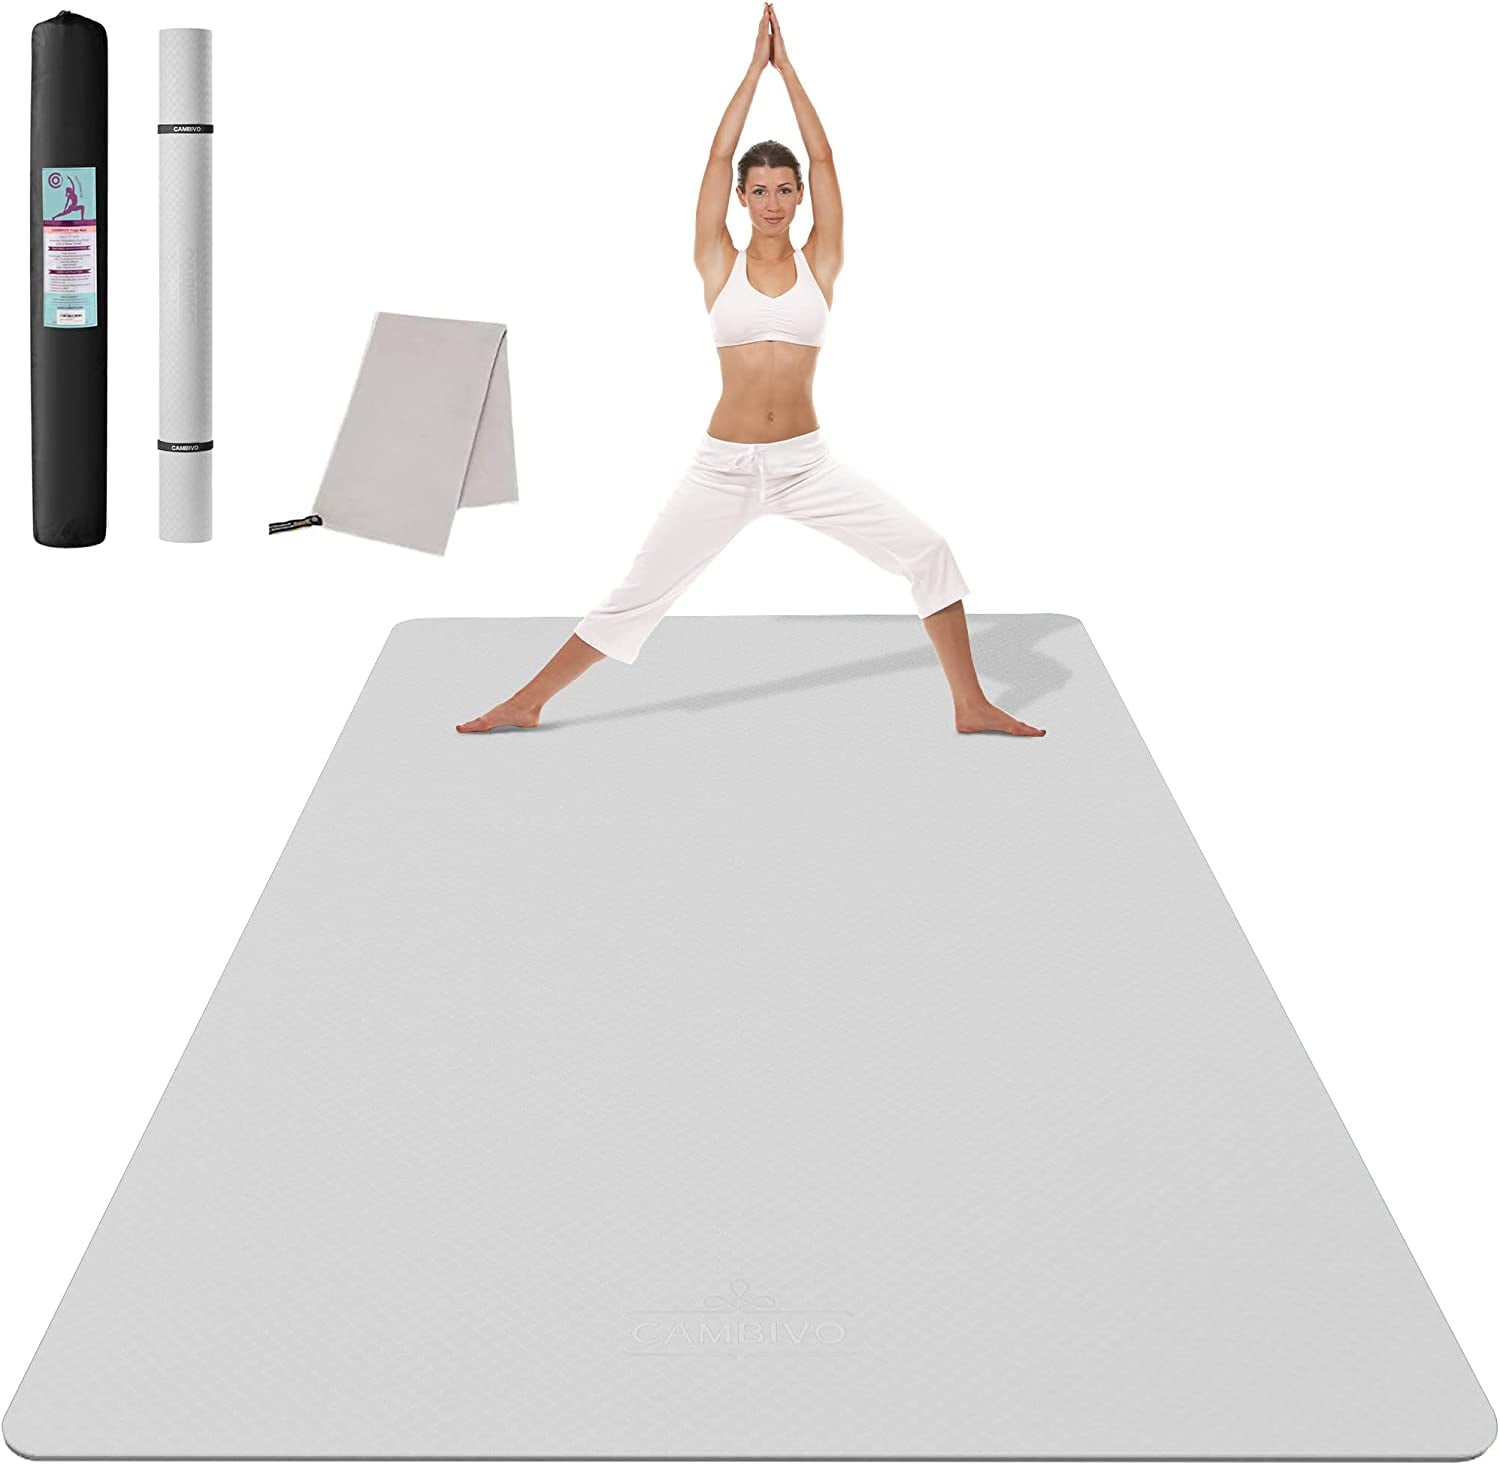 Best yoga mat deals for stretching and strengthening - 220 Triathlon